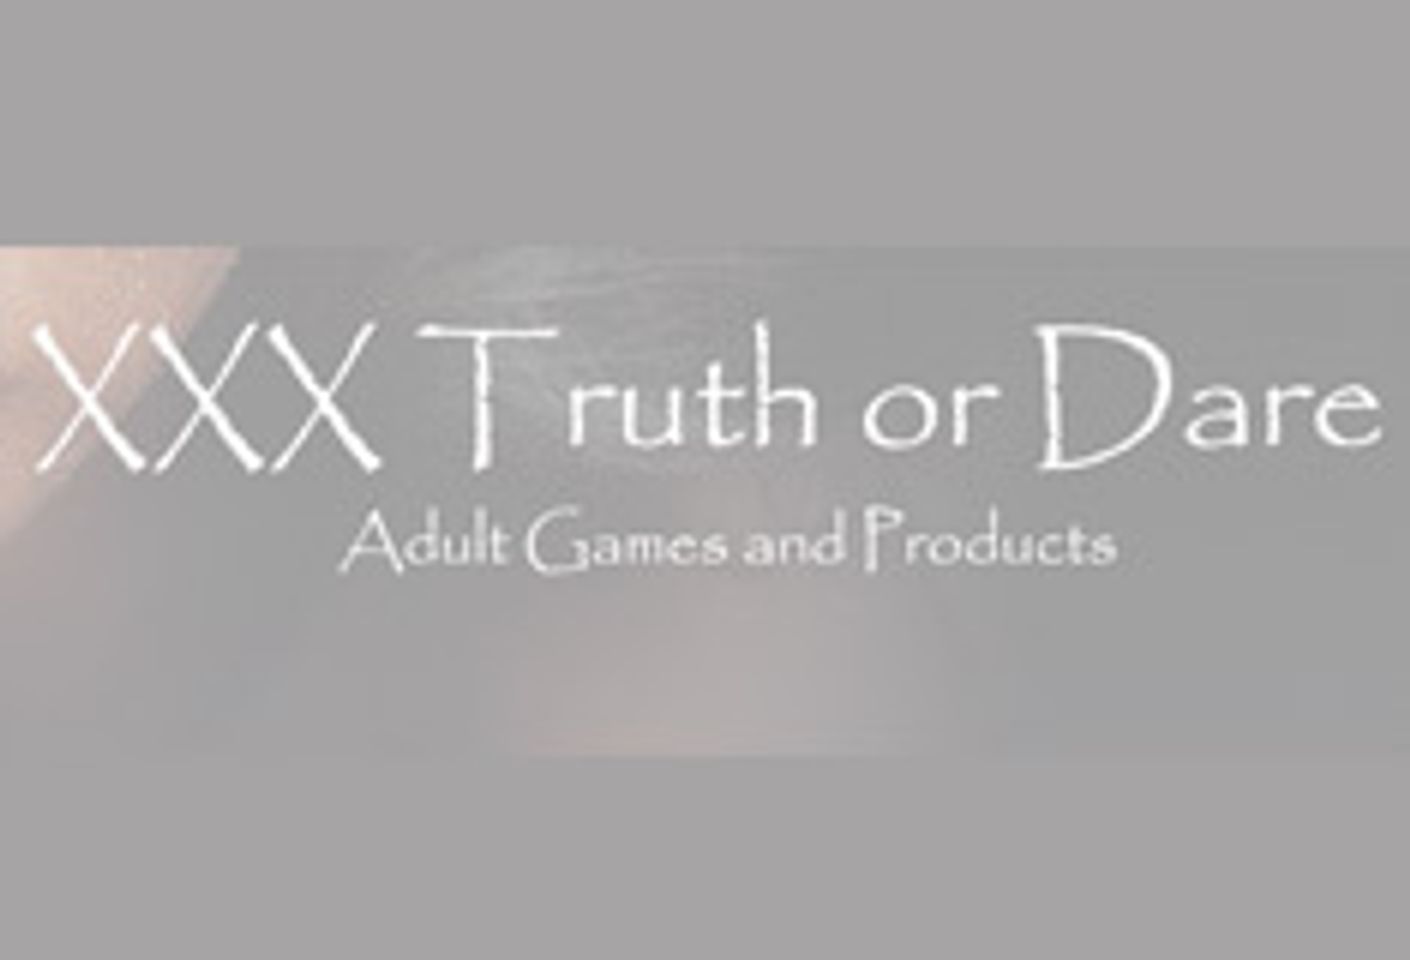 XXX Truth or Dare Announces 'Duo Cards' for Couples